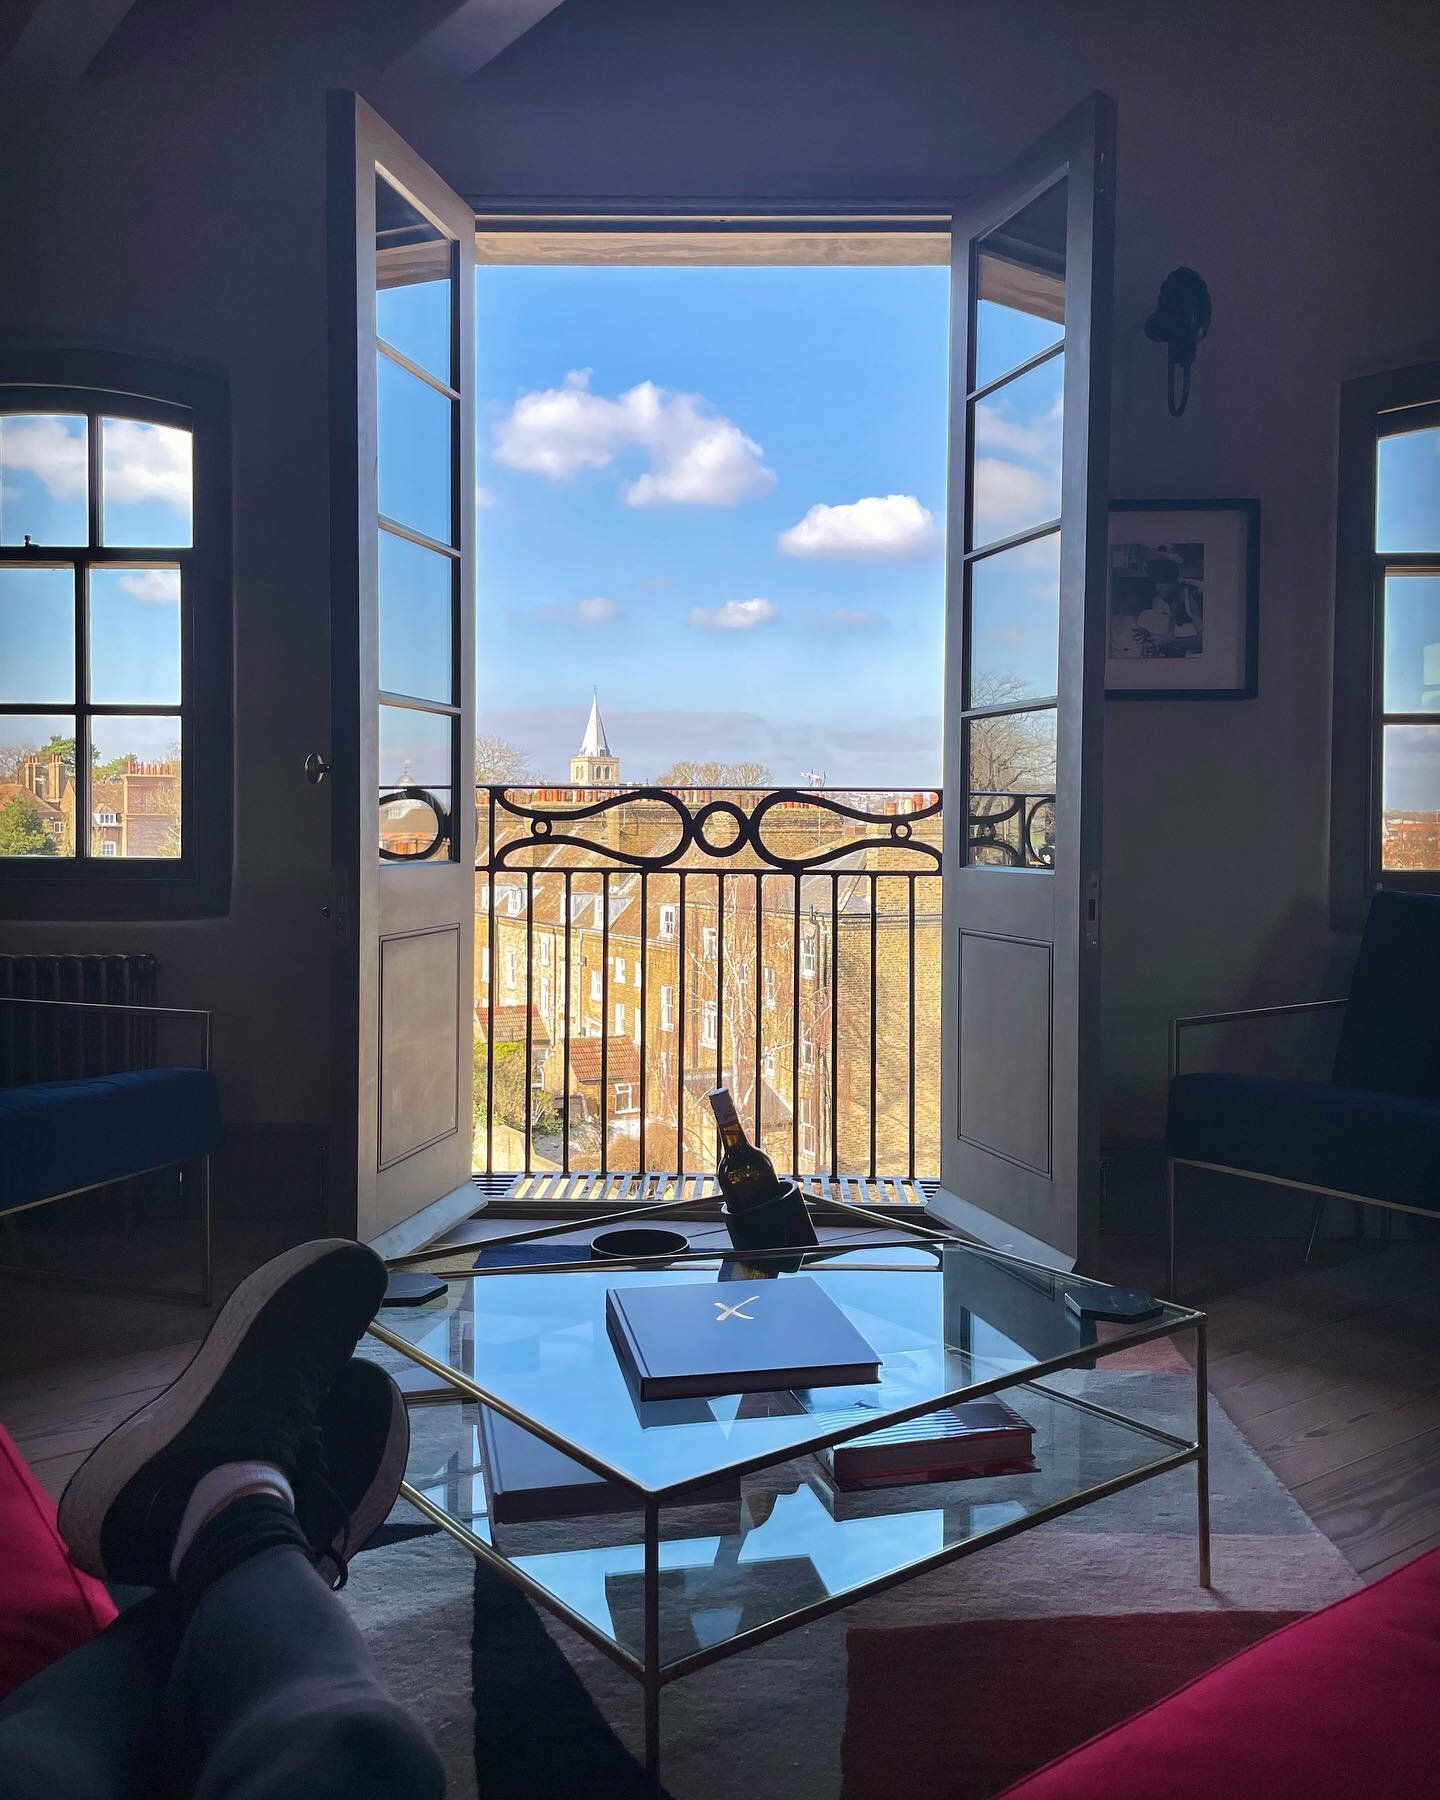 Gorgeous spring-like afternoon. 🥰 The @towerofcreativity cathedral views were stunning today. Bring on the sunshine!
-
#brewery #uniquehomes #rochesteruk #rochesterkent #design #designinspiration #interiordesign #interiorstyle #interiordesigntrends 